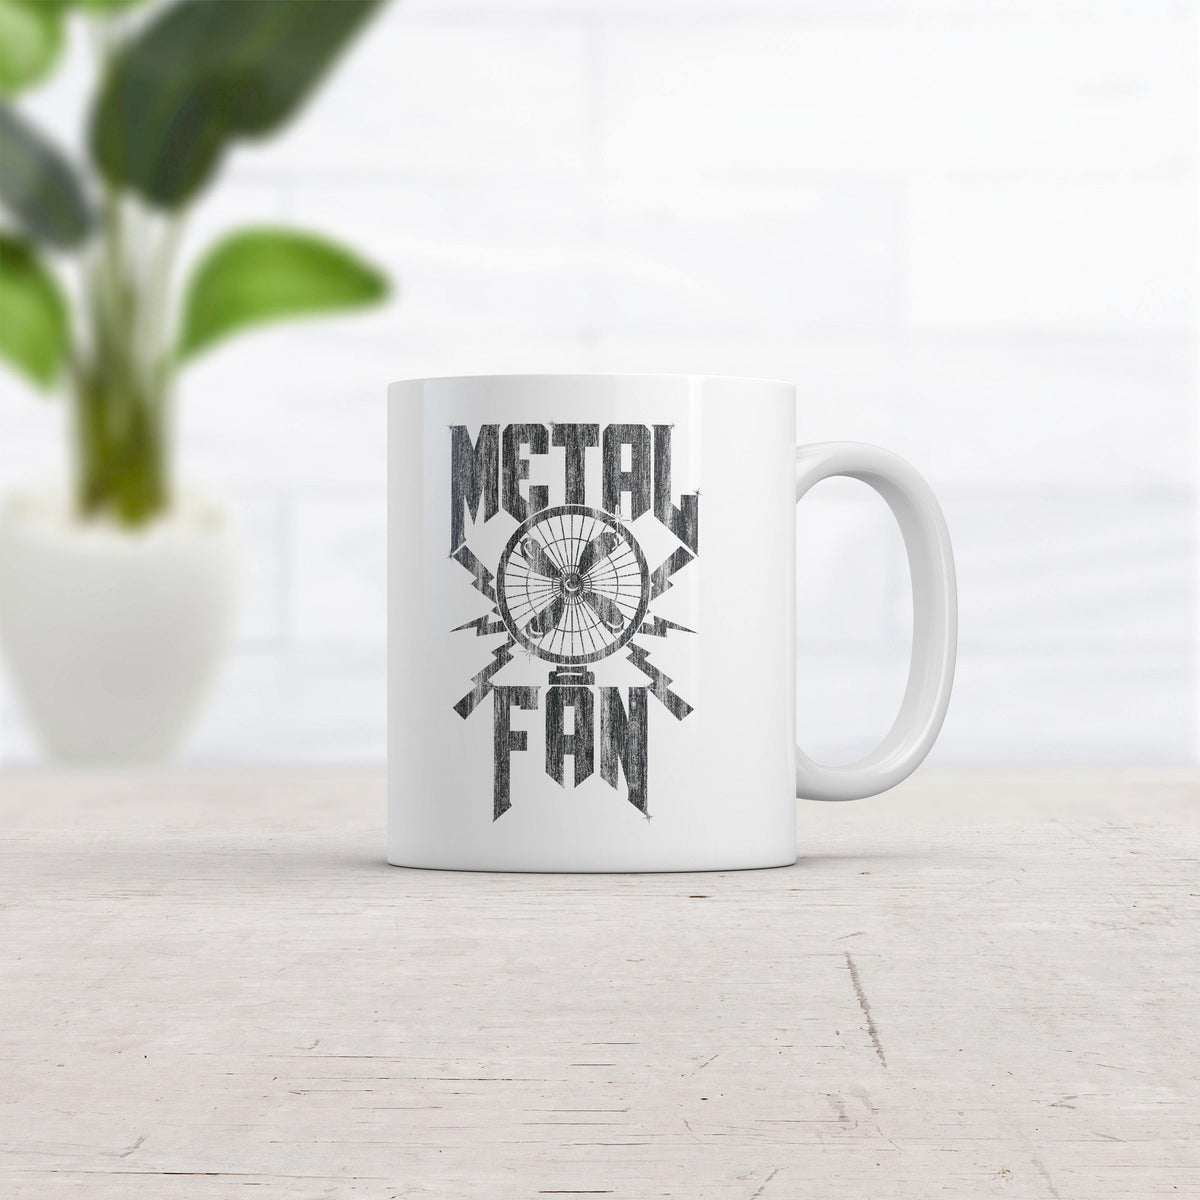 Metal Fan Mug Funny Sarcastic Air Blowing Fan Graphic Novelty Music Coffee Cup-11oz  -  Crazy Dog T-Shirts